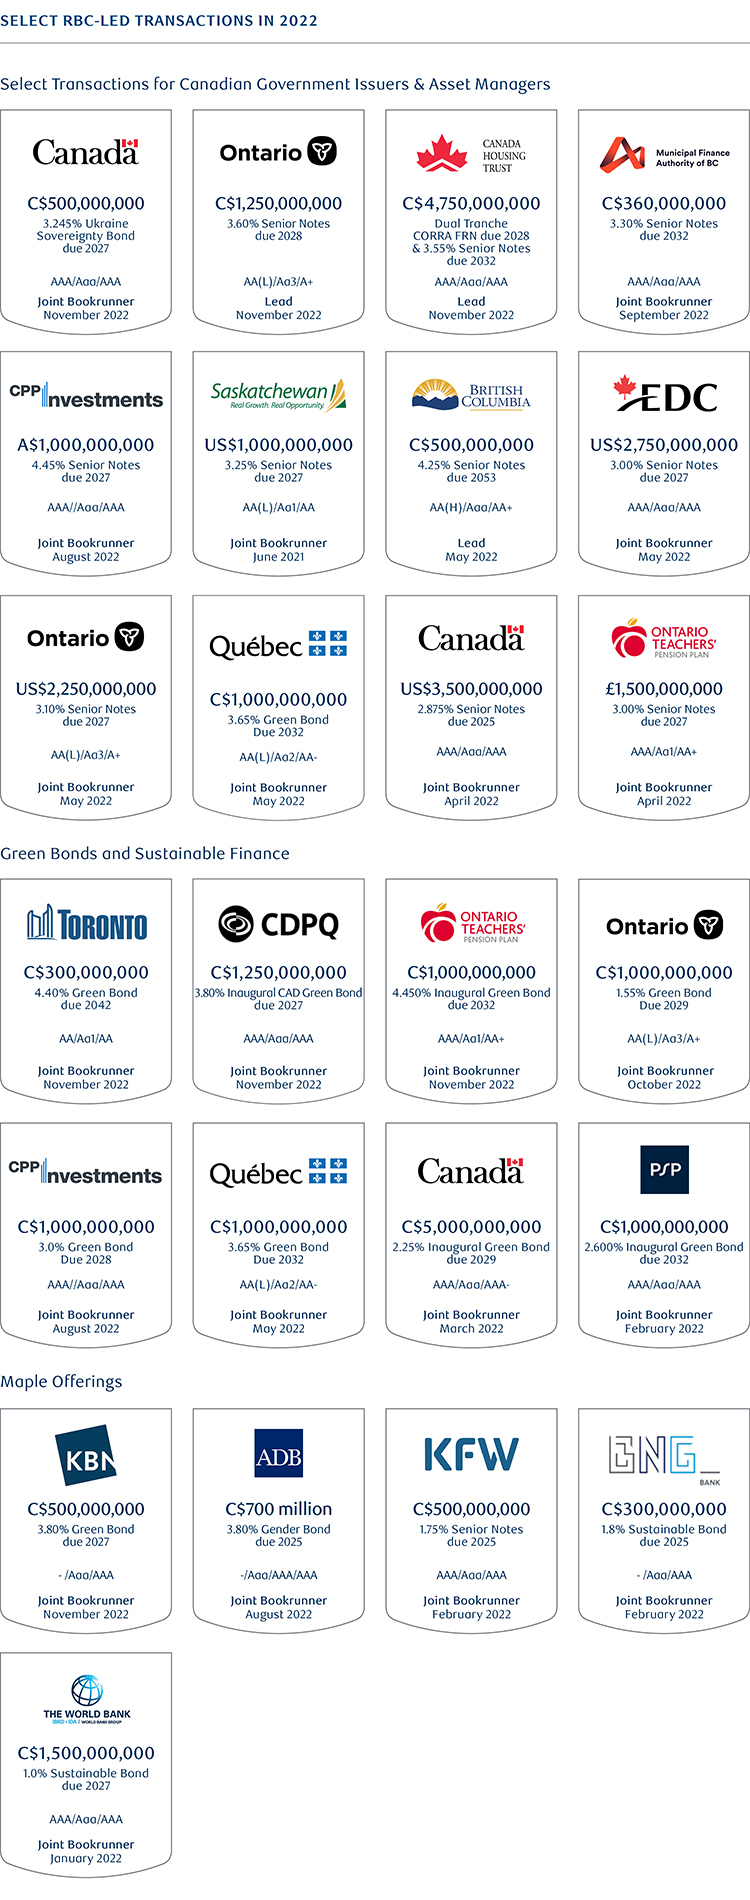 Select Transactions for Canadian Government Issuers & Asset Managers tombstone images